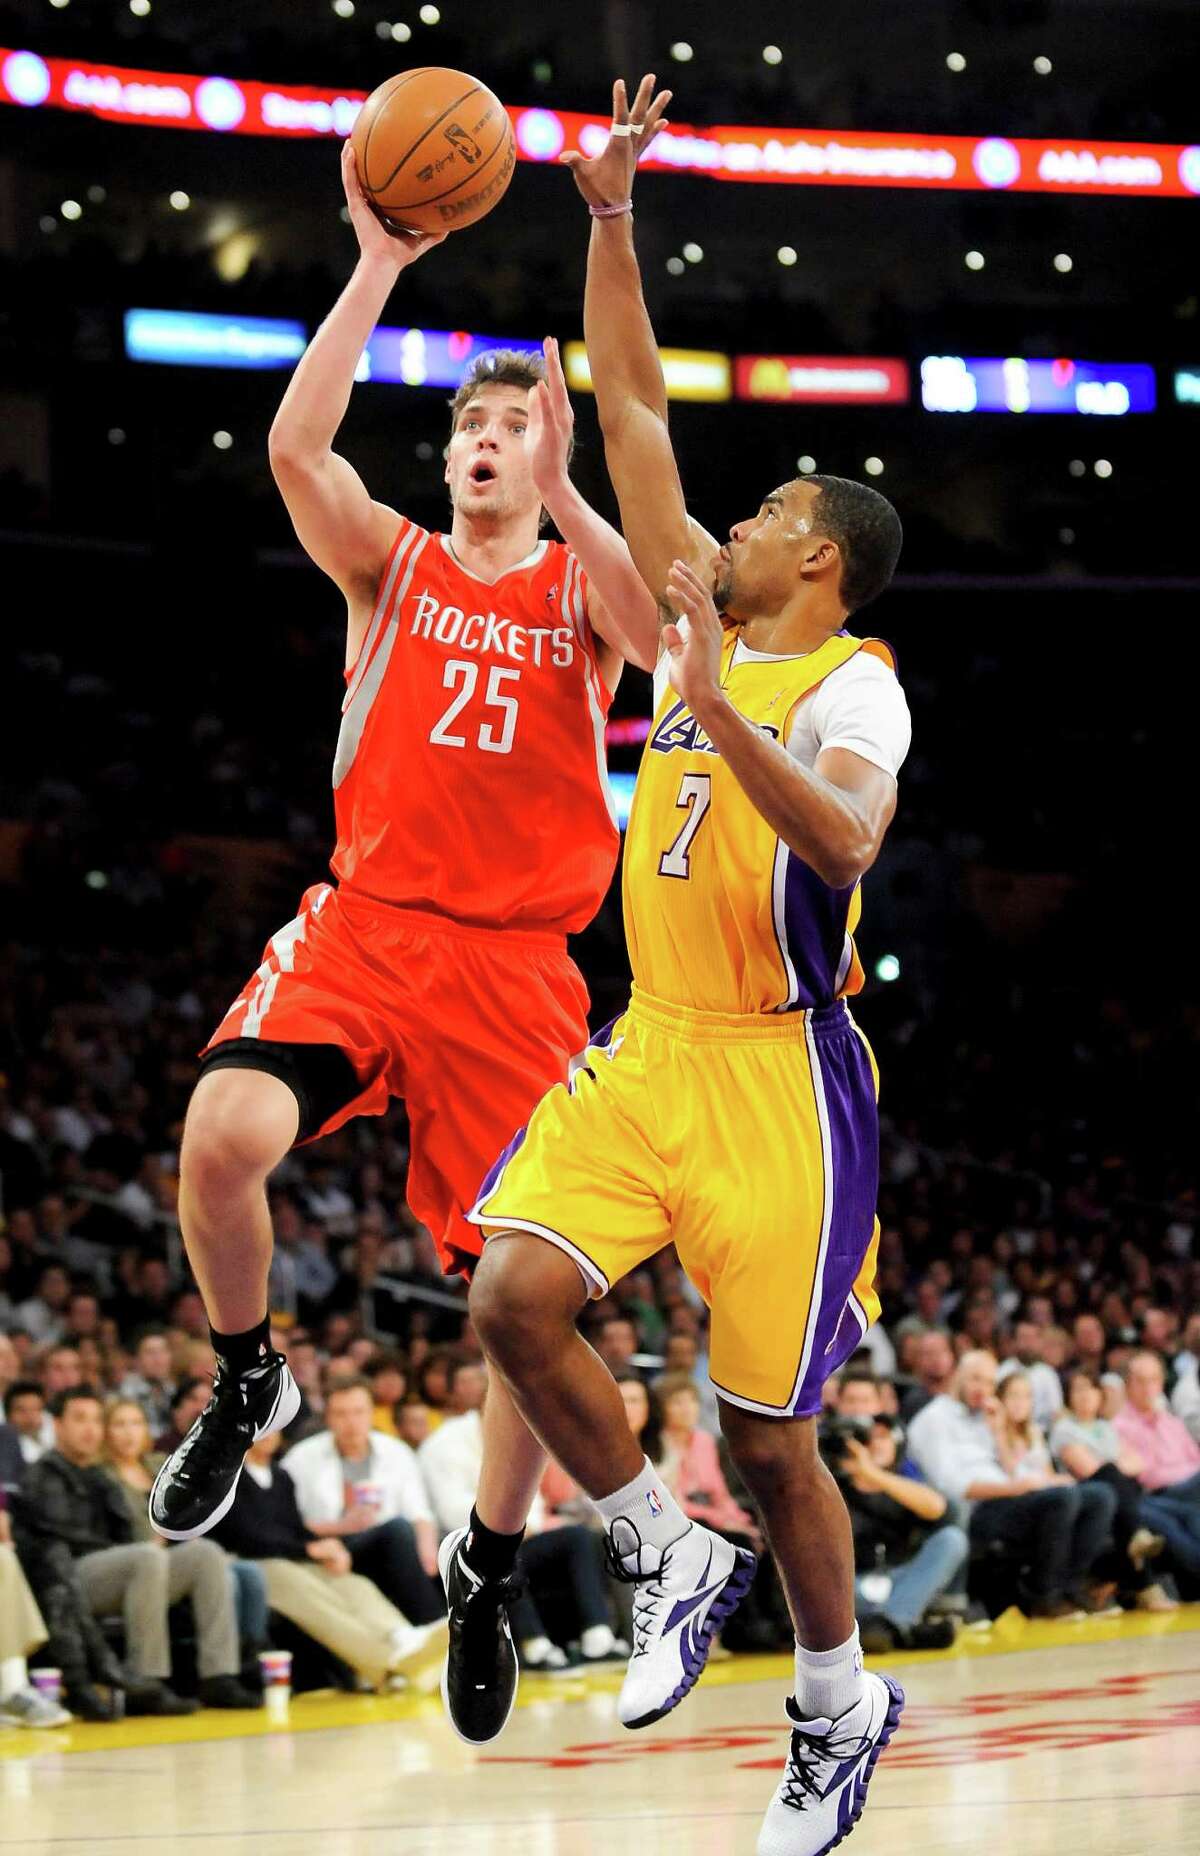 Houston Rockets forward Chandler Parsons (25) attempts to get by Los Angeles Lakers guard Ramon Sessions (7) on a fast break in the first half of an NBA basketball game, Friday, April 6, 2012, in Los Angeles. (AP Photo/Gus Ruelas)